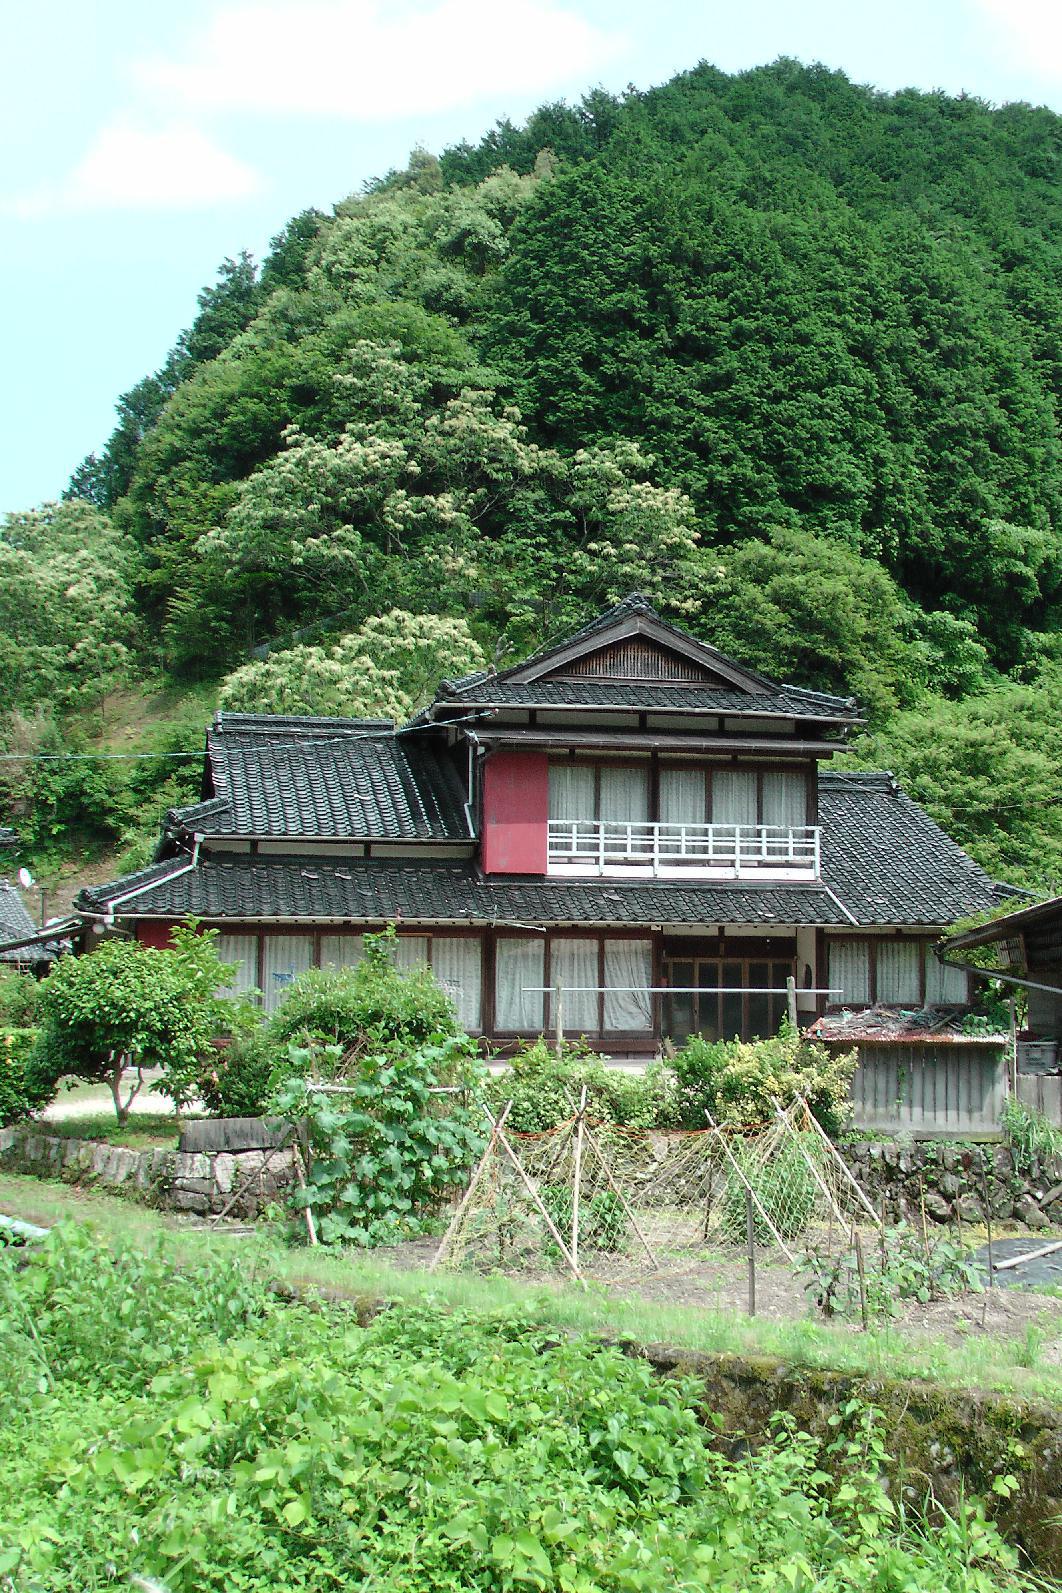 another traditional Japanese house